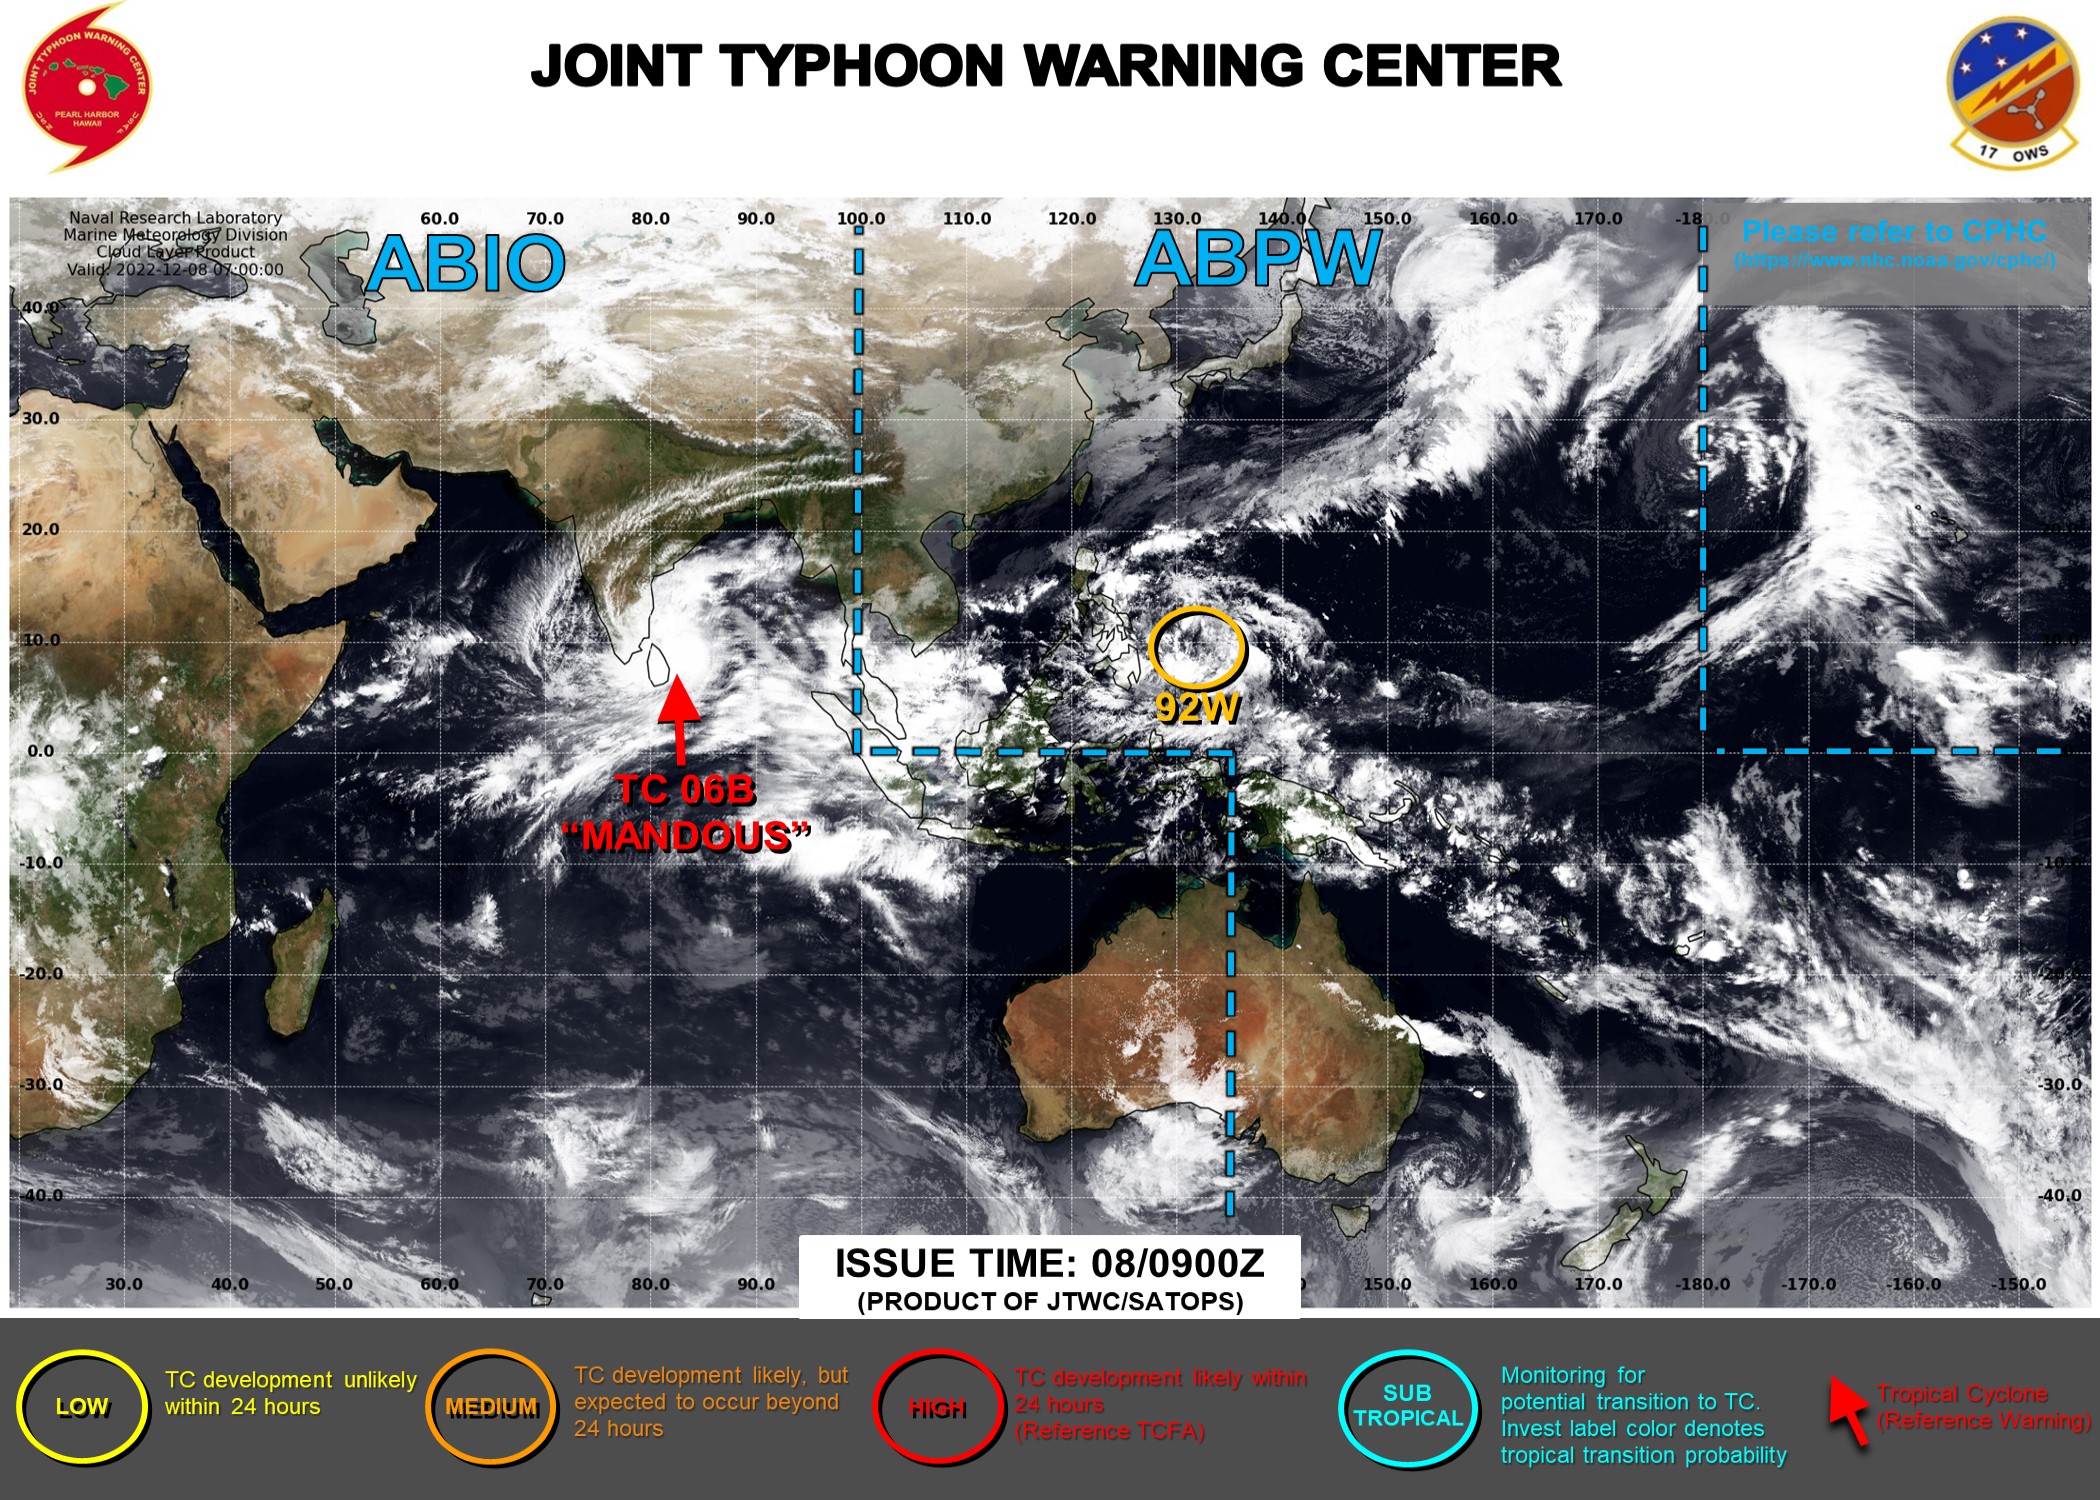 JTWC IS ISSUING 6HOURLY WARNINGS AND 3HOURLY SATELLITE BULLETINS ON TC 06B(MANDOUS).